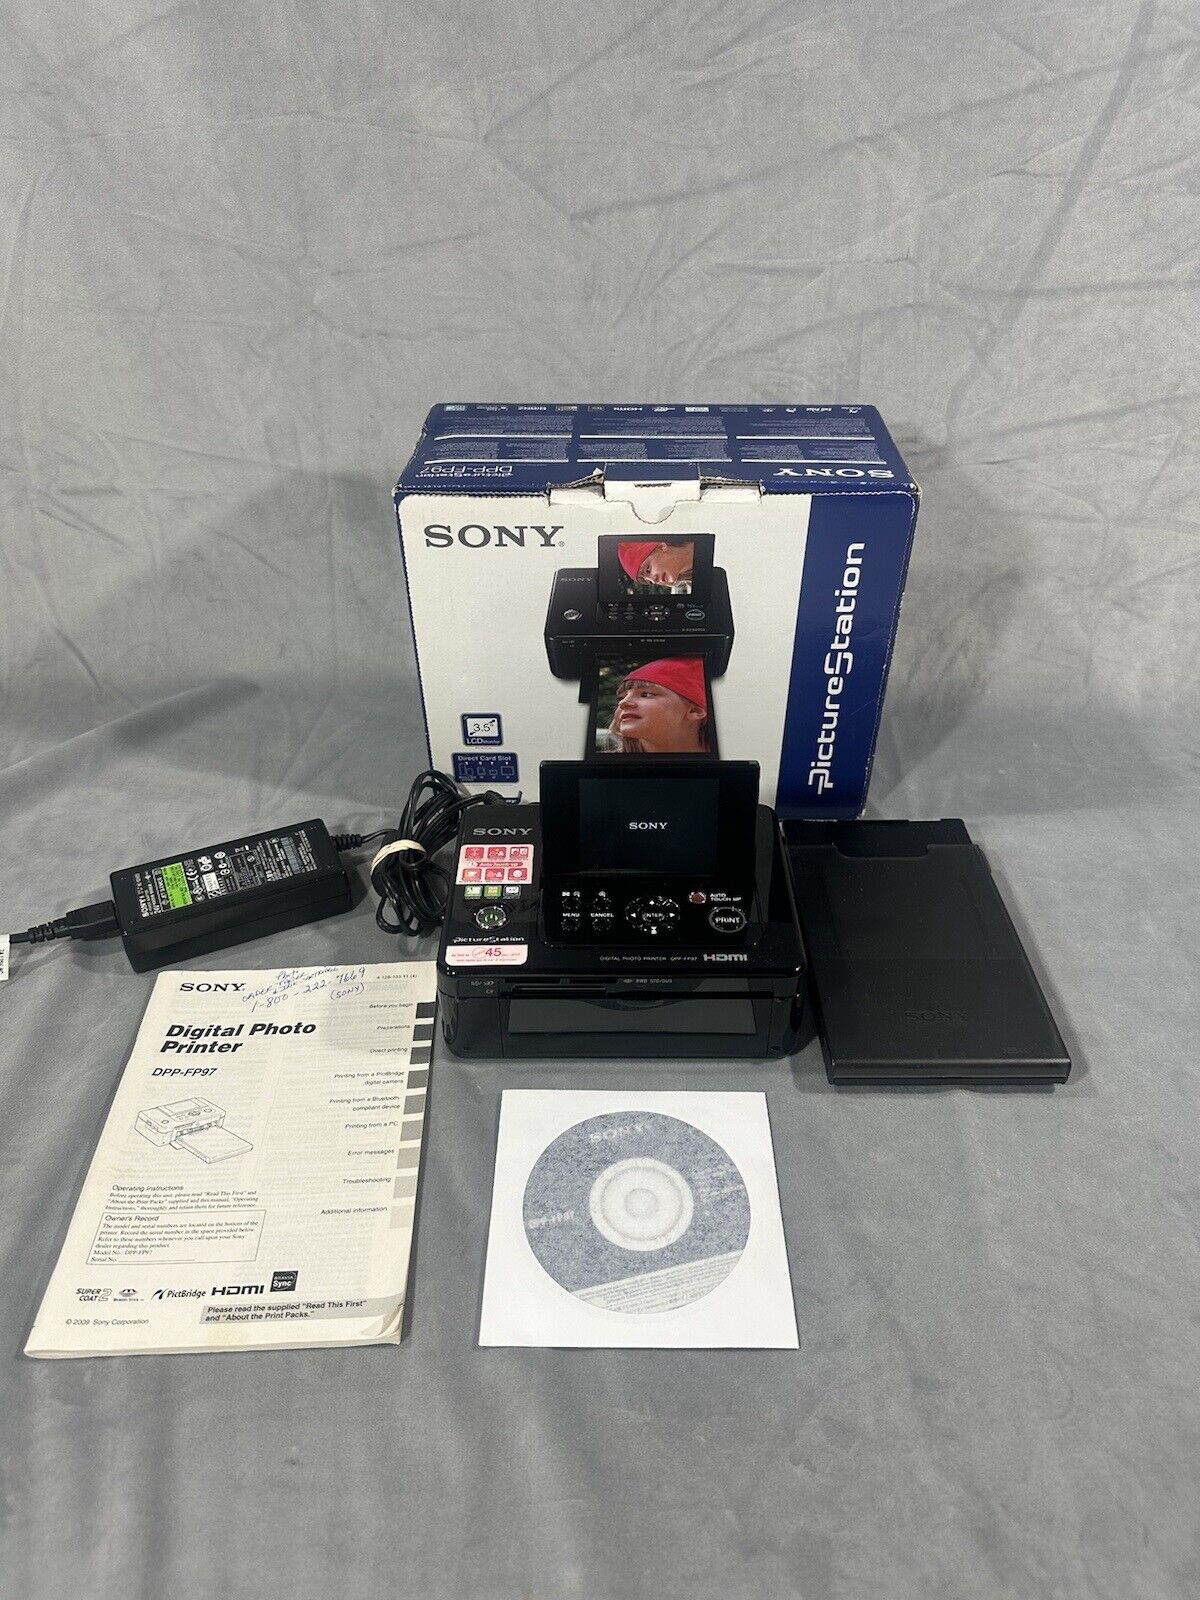 SONY DPP-FP97 Picture Station  DIGITAL PHOTO THERMAL PRINTER  